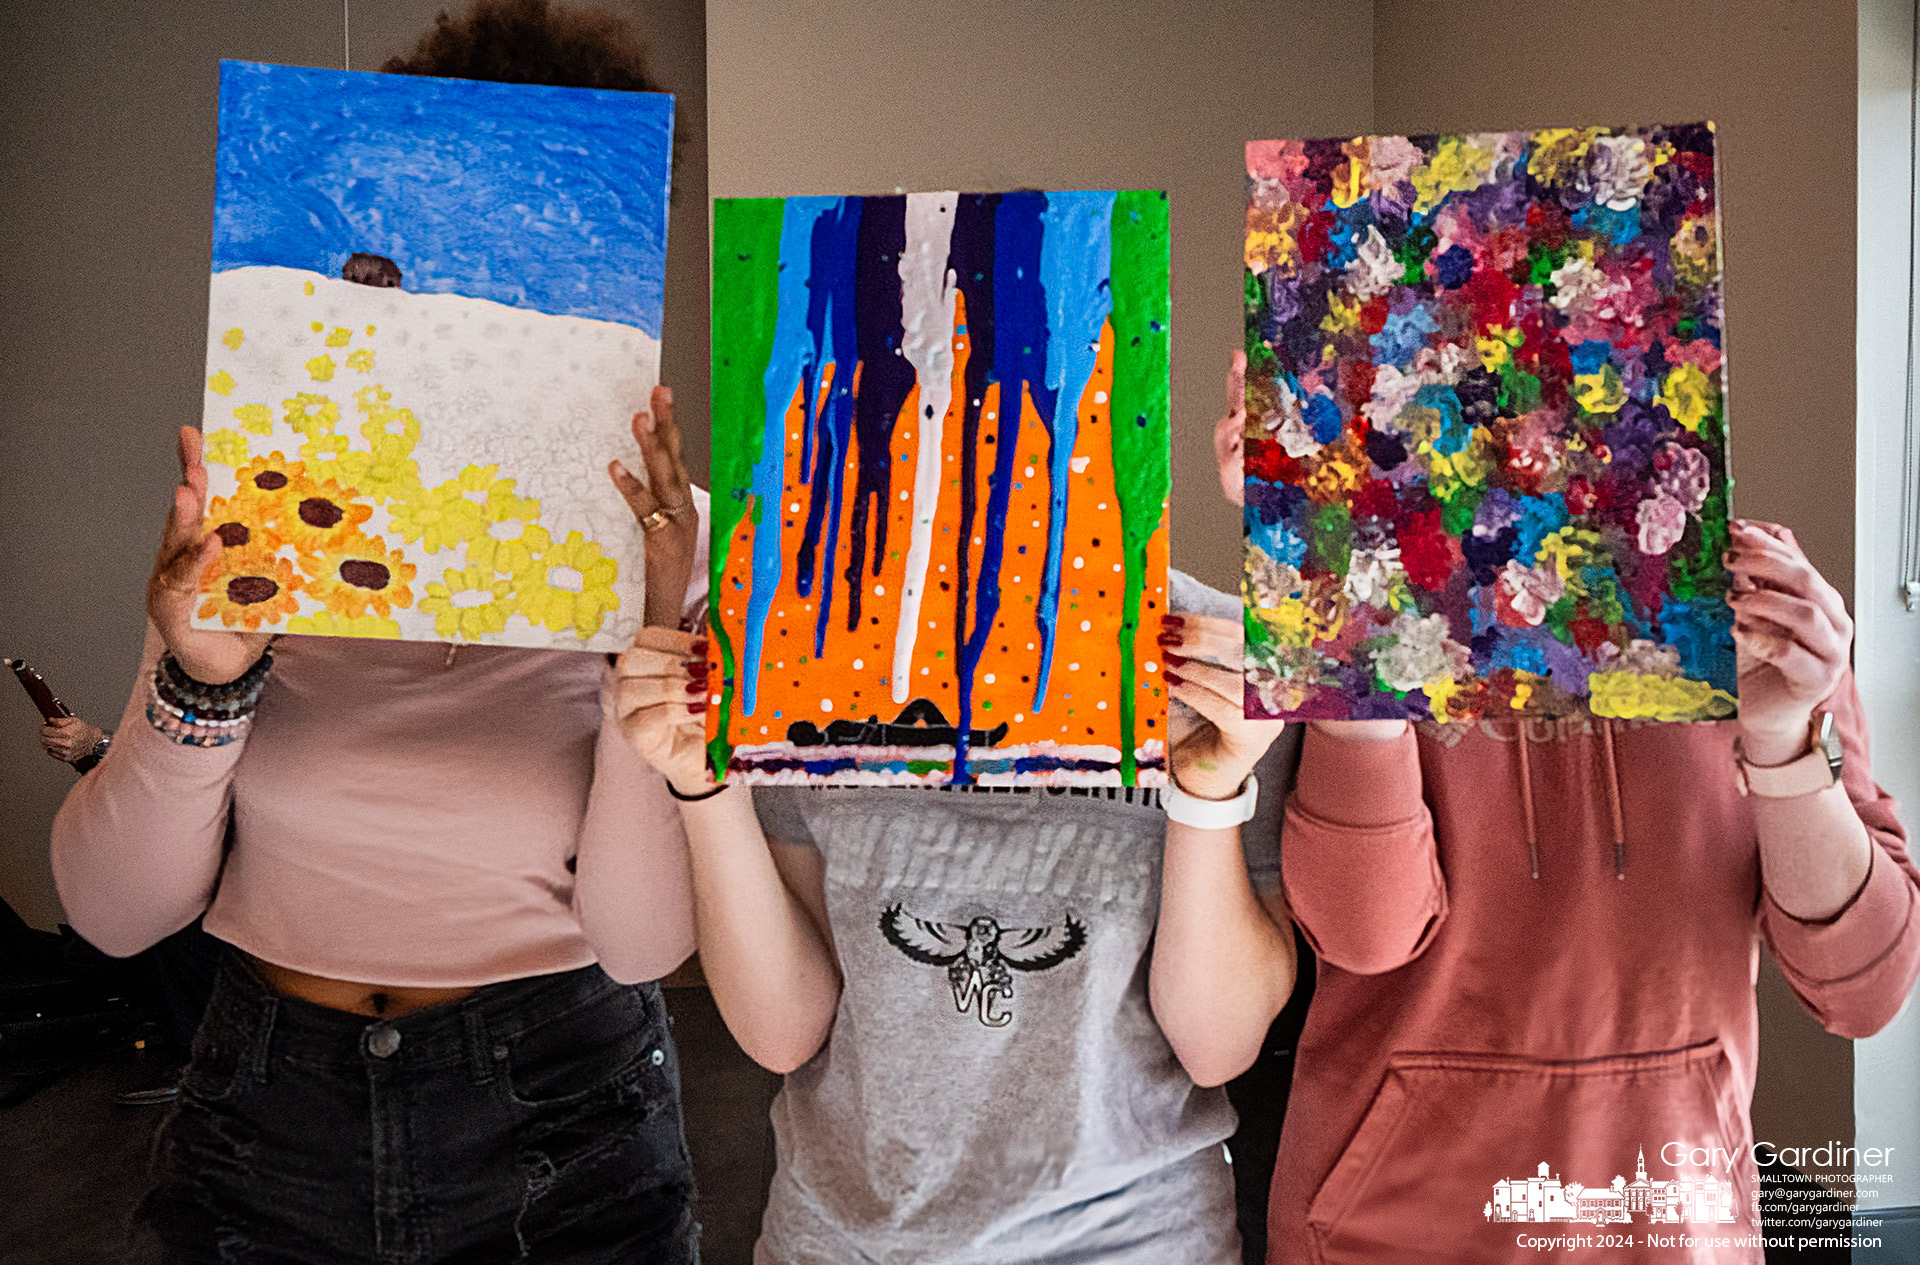 Three young artists show their works created on the theme of the environment during a performance by the woodwind section of The Westerville Symphony at the Women in Science event at the Westerville Community Center. My Final Photo for February 10, 2024.